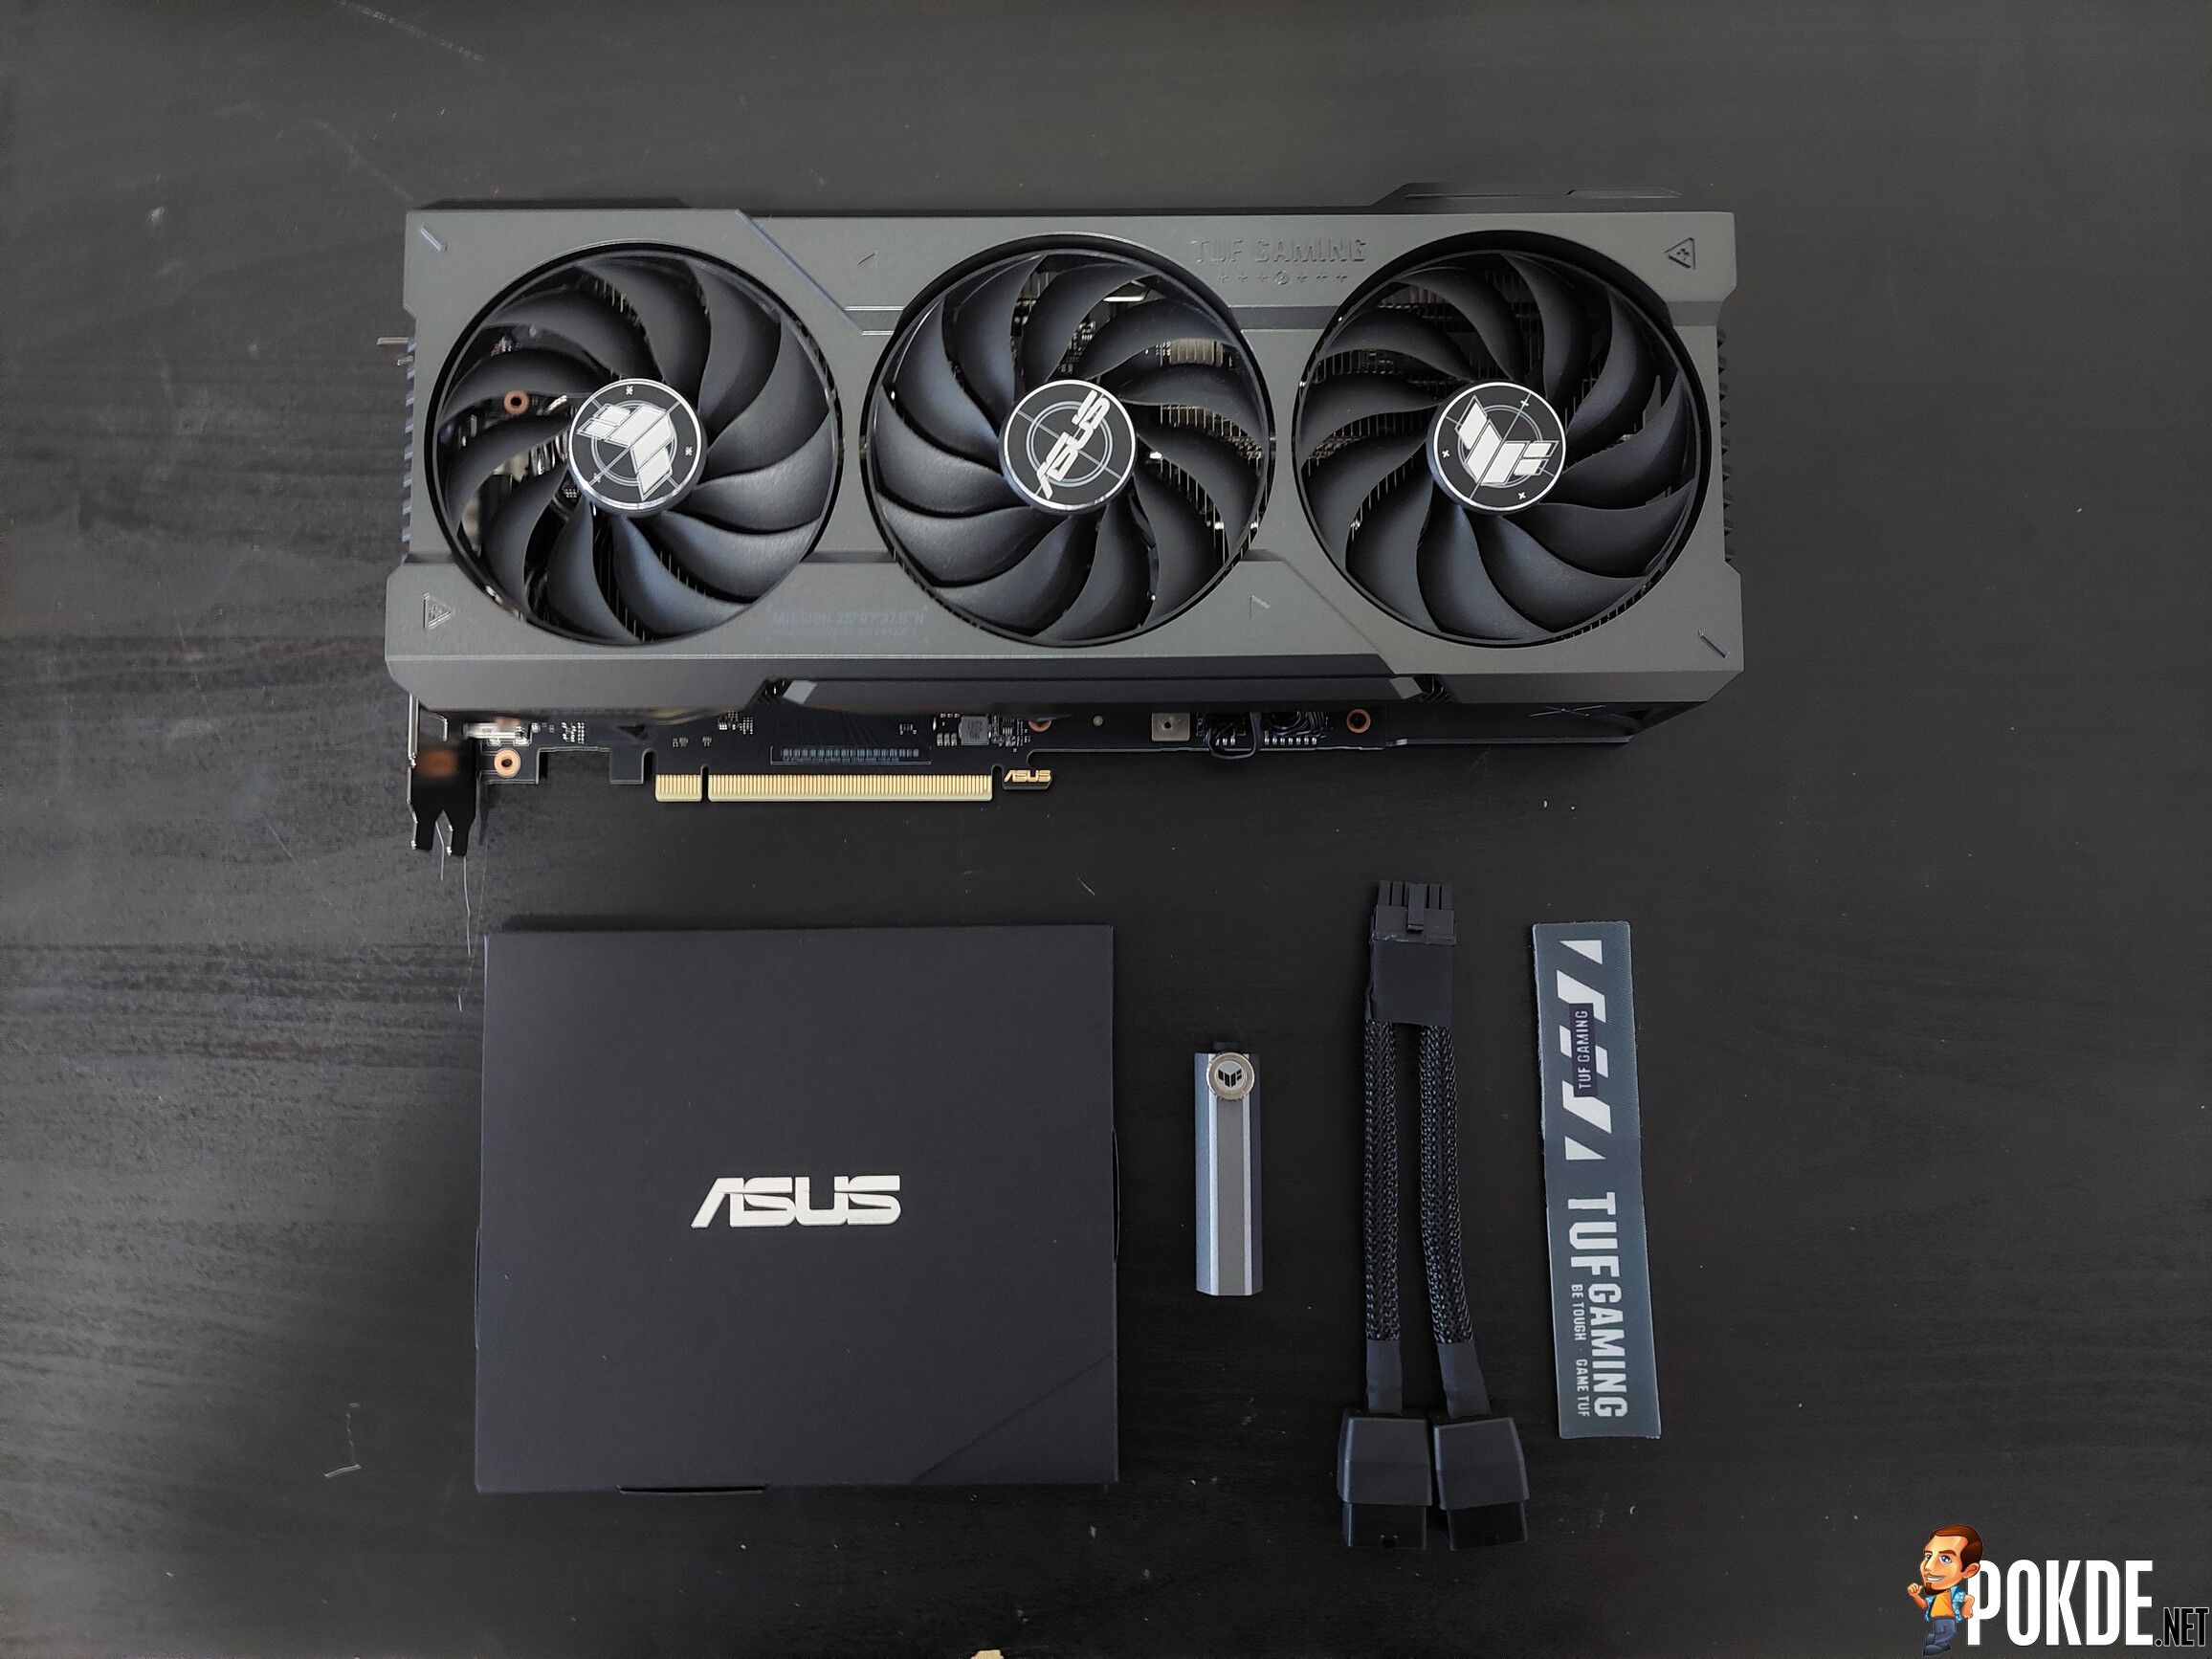 ASUS TUF Gaming GeForce RTX 4070 Ti OC Edition Review - Value Is Relative... 29